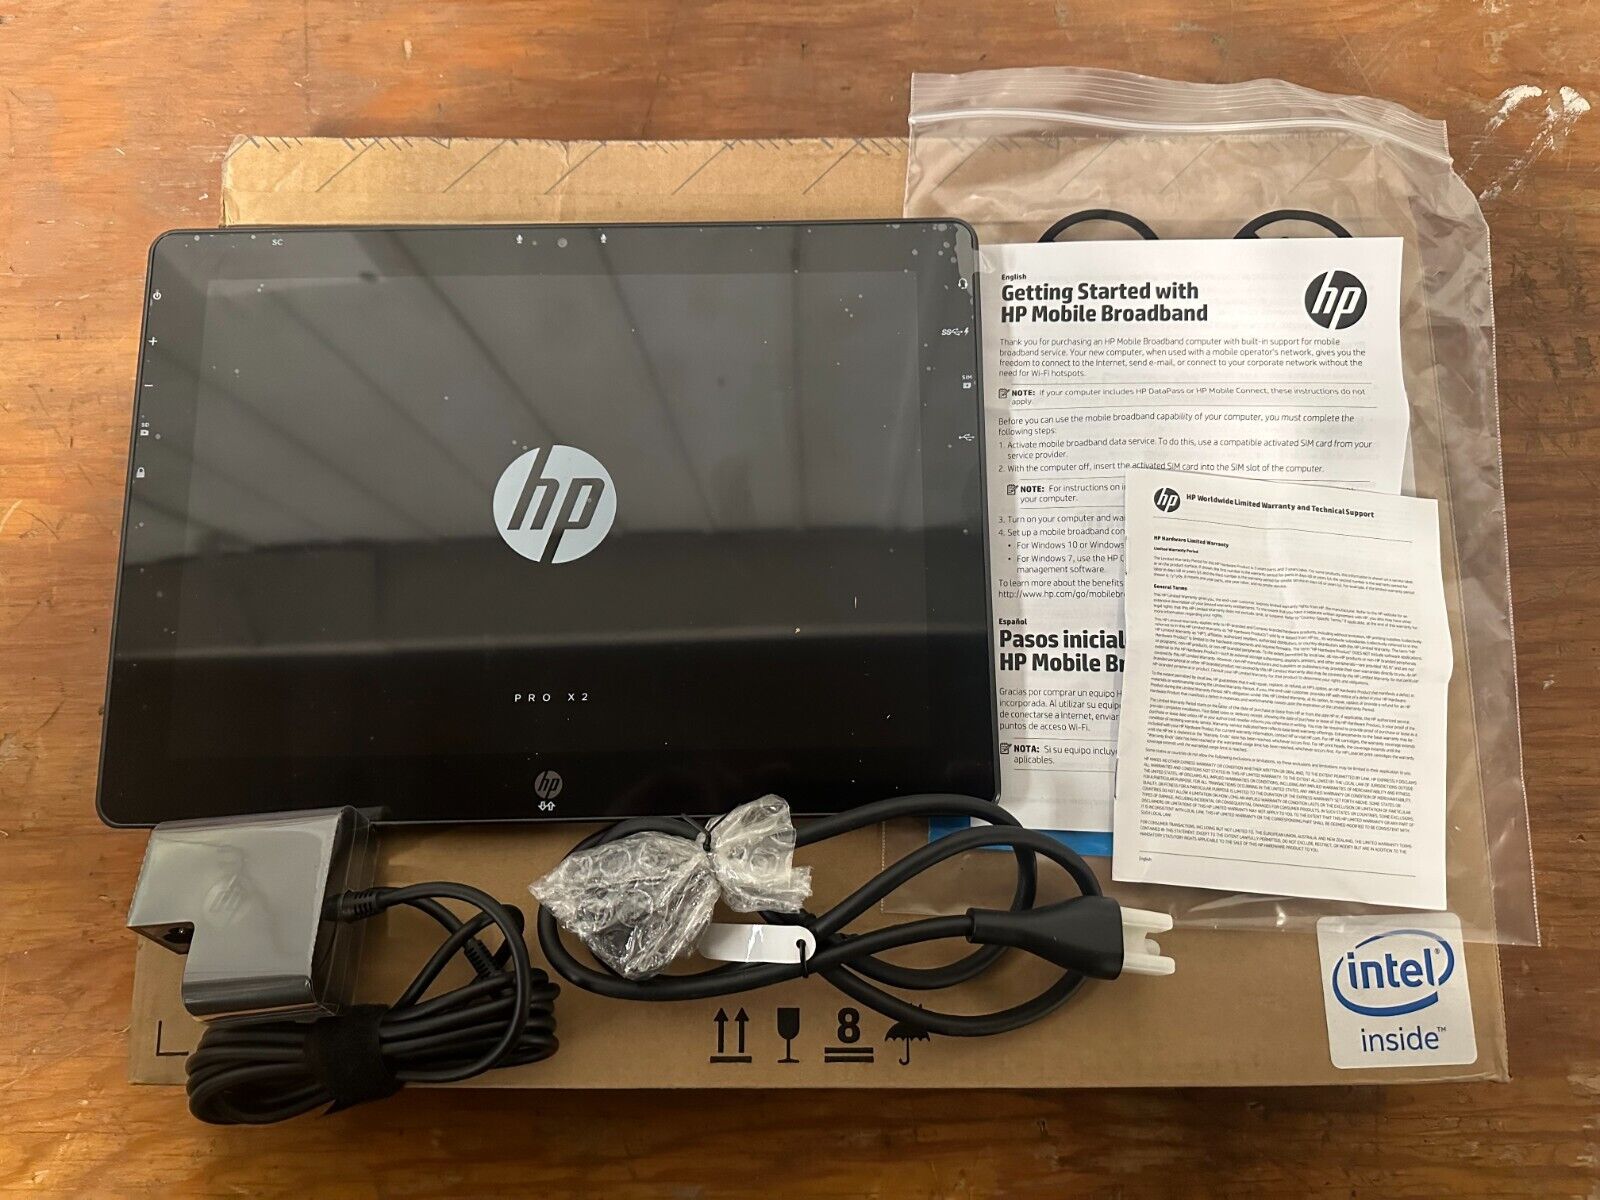 HP Pro x2 612 G2 Tablet (New In Box, No Keyboards)